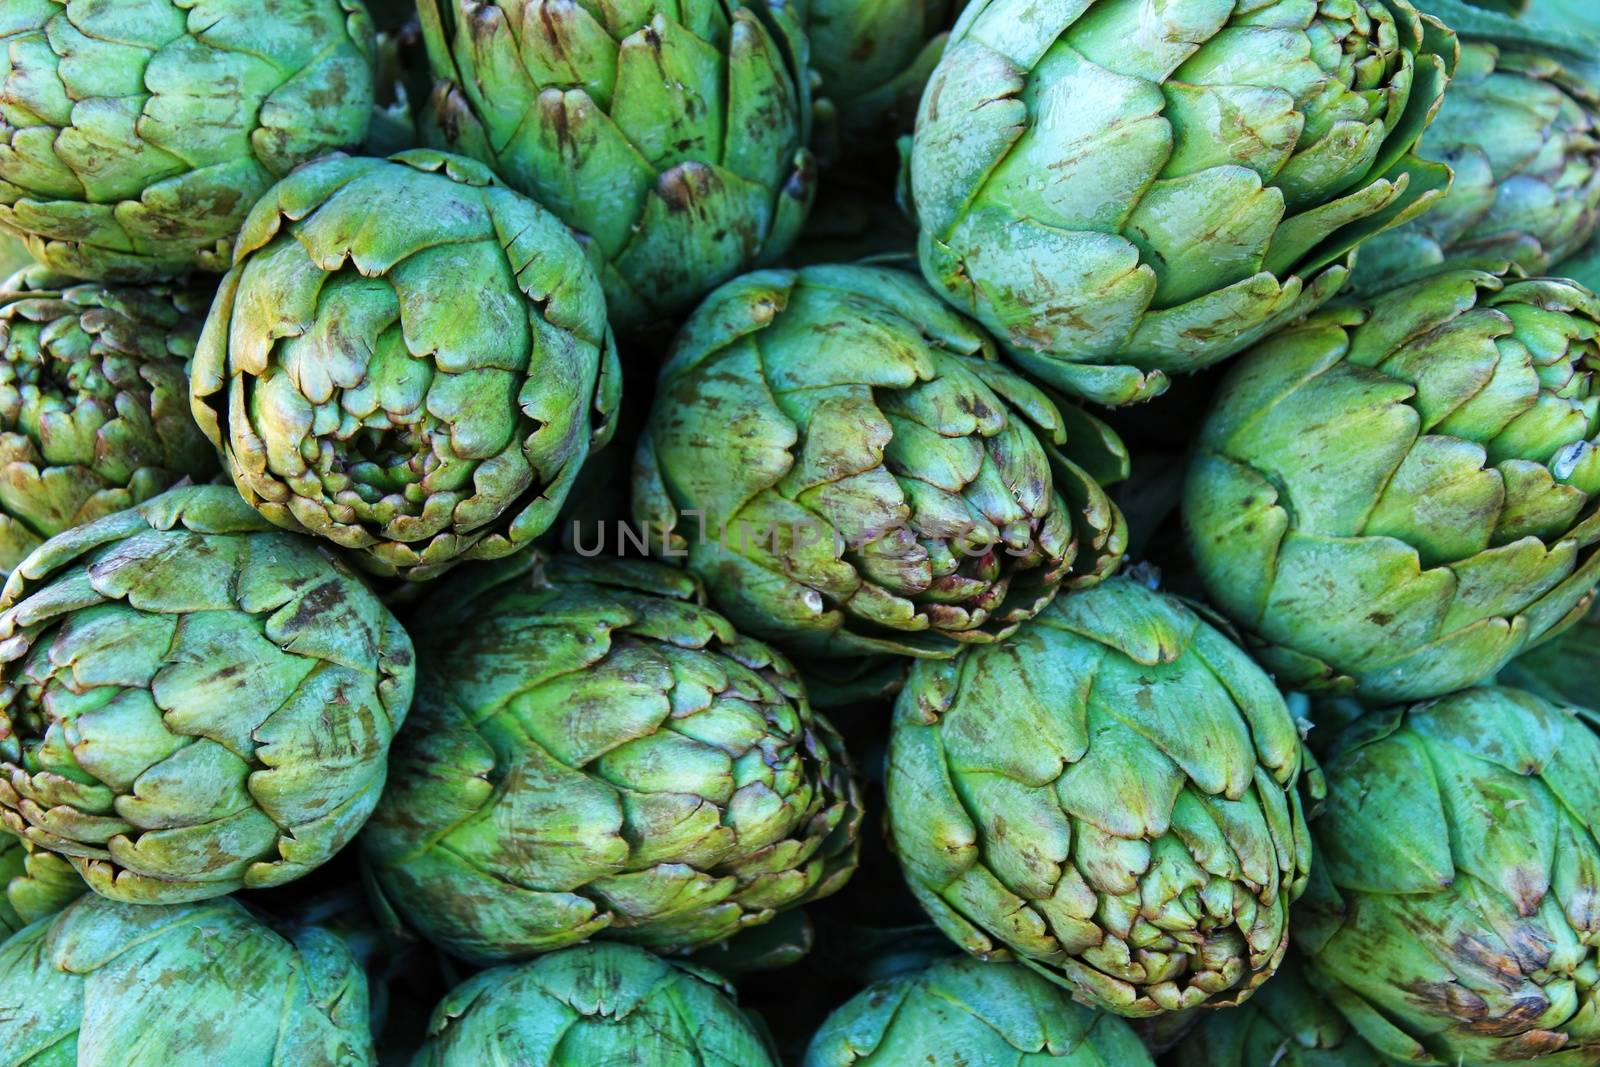 Artichokes for sale at a farmer market stall in Spain